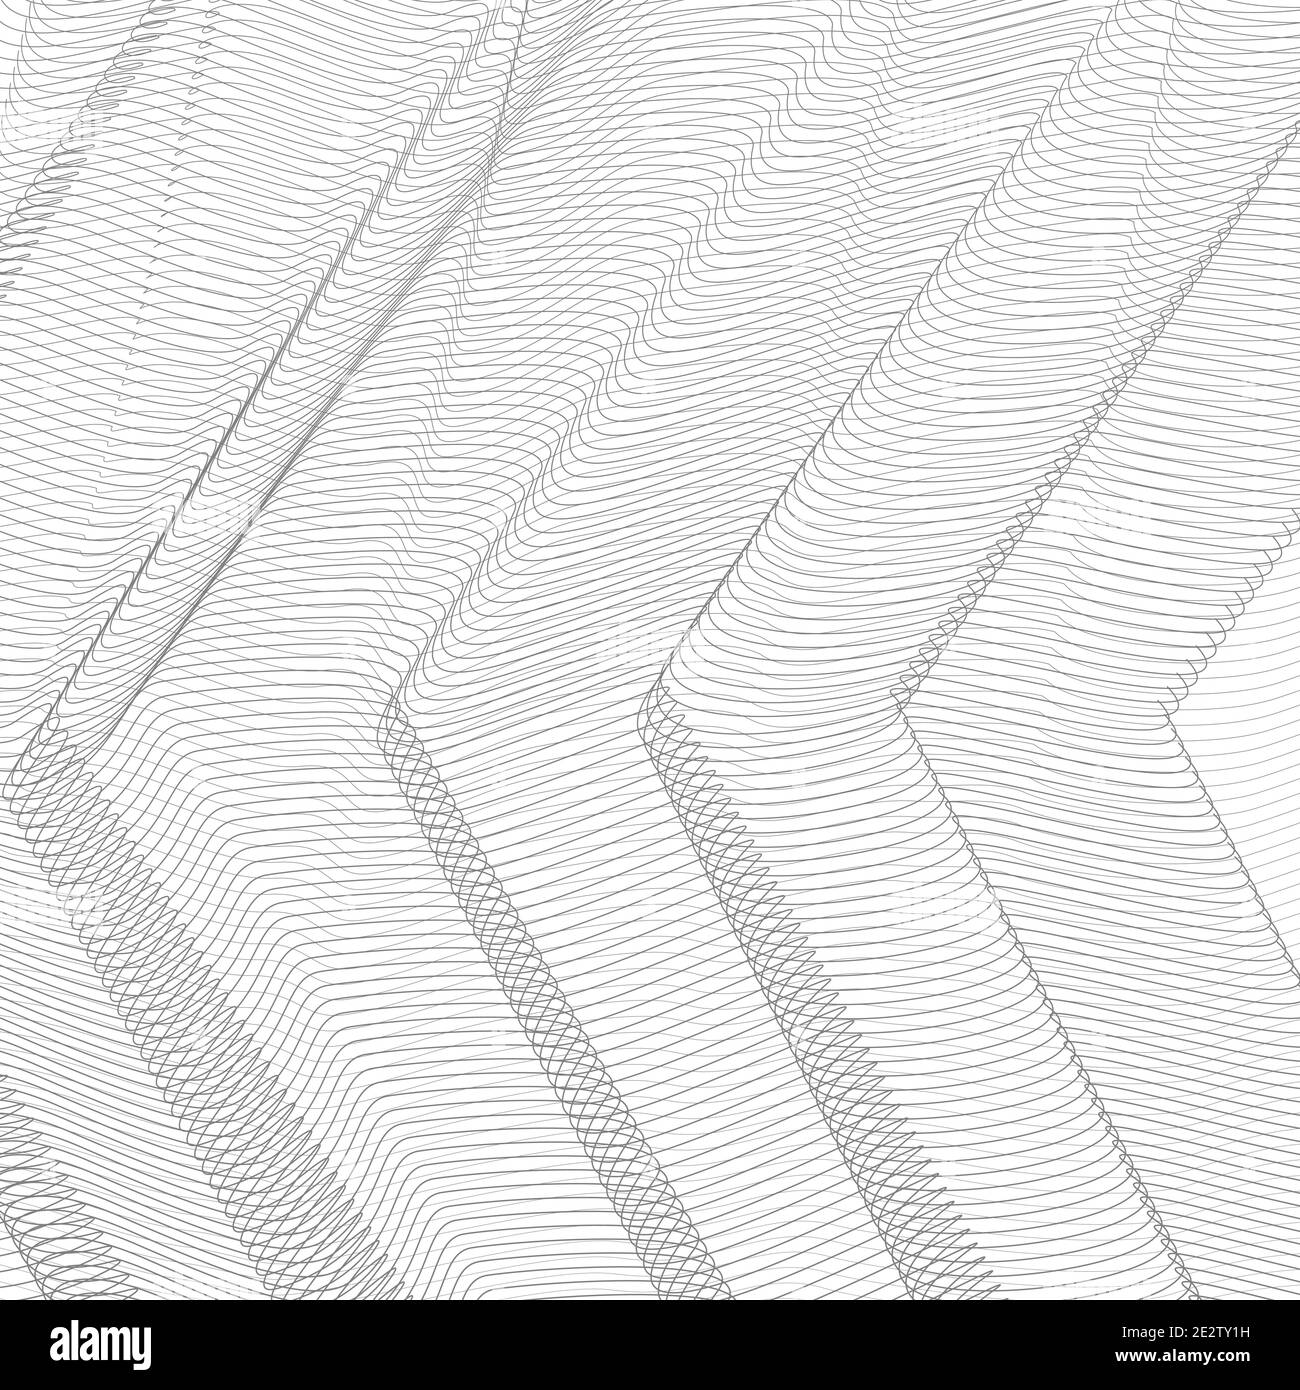 Cross pleated Black and White Stock Photos & Images - Alamy